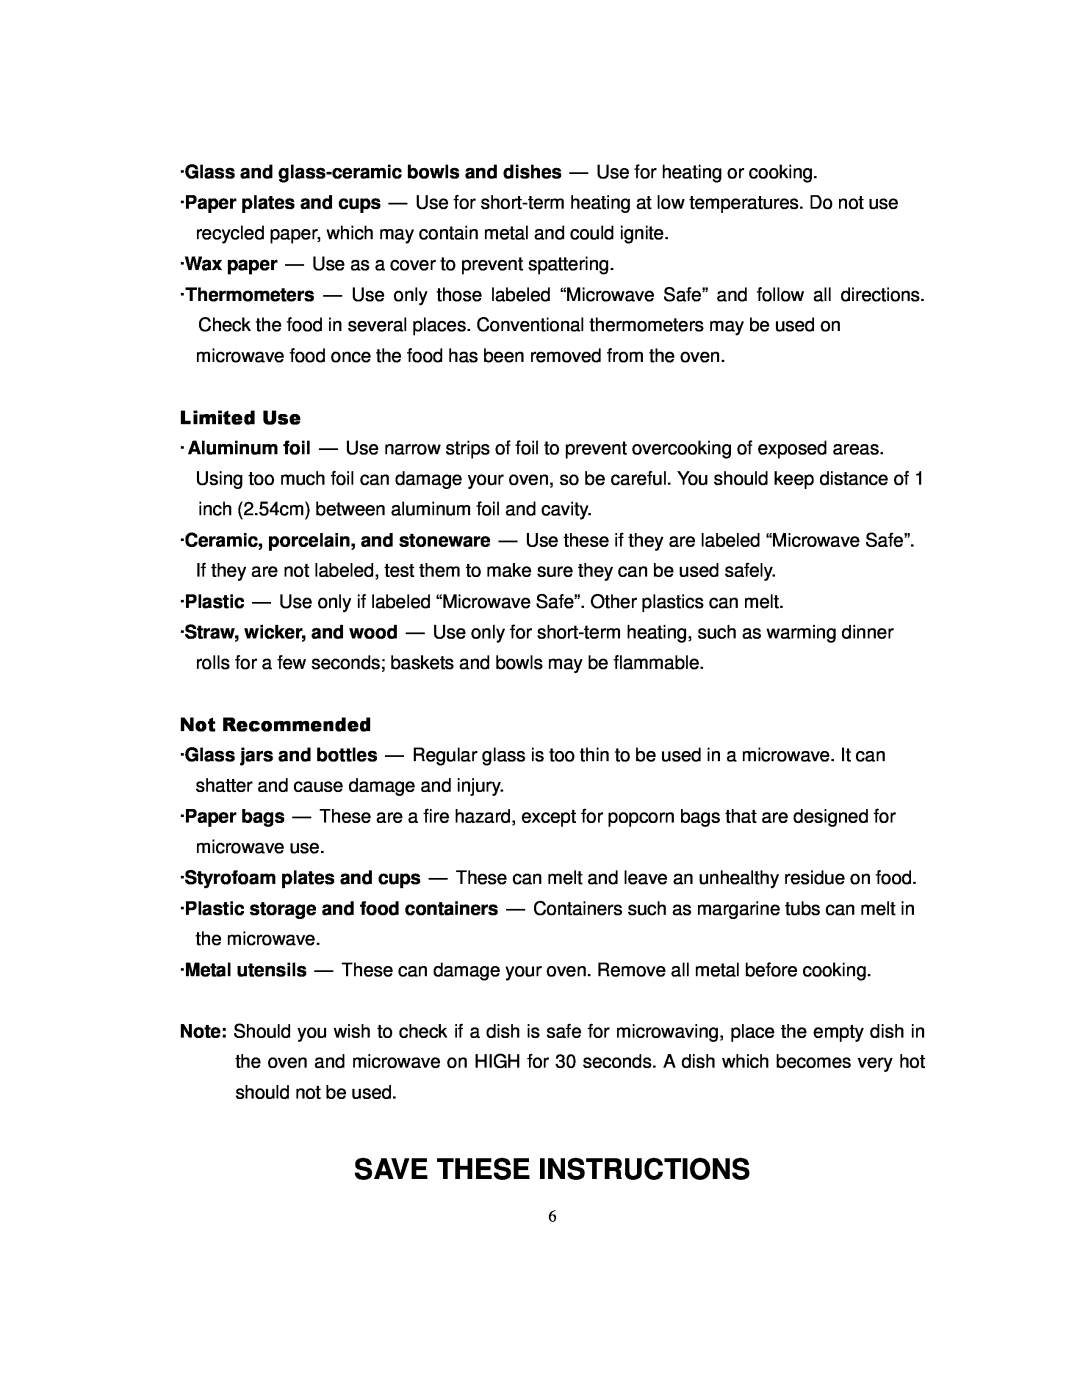 Magic Chef MCD775W1 owner manual Save These Instructions, ·Wax paper - Use as a cover to prevent spattering 